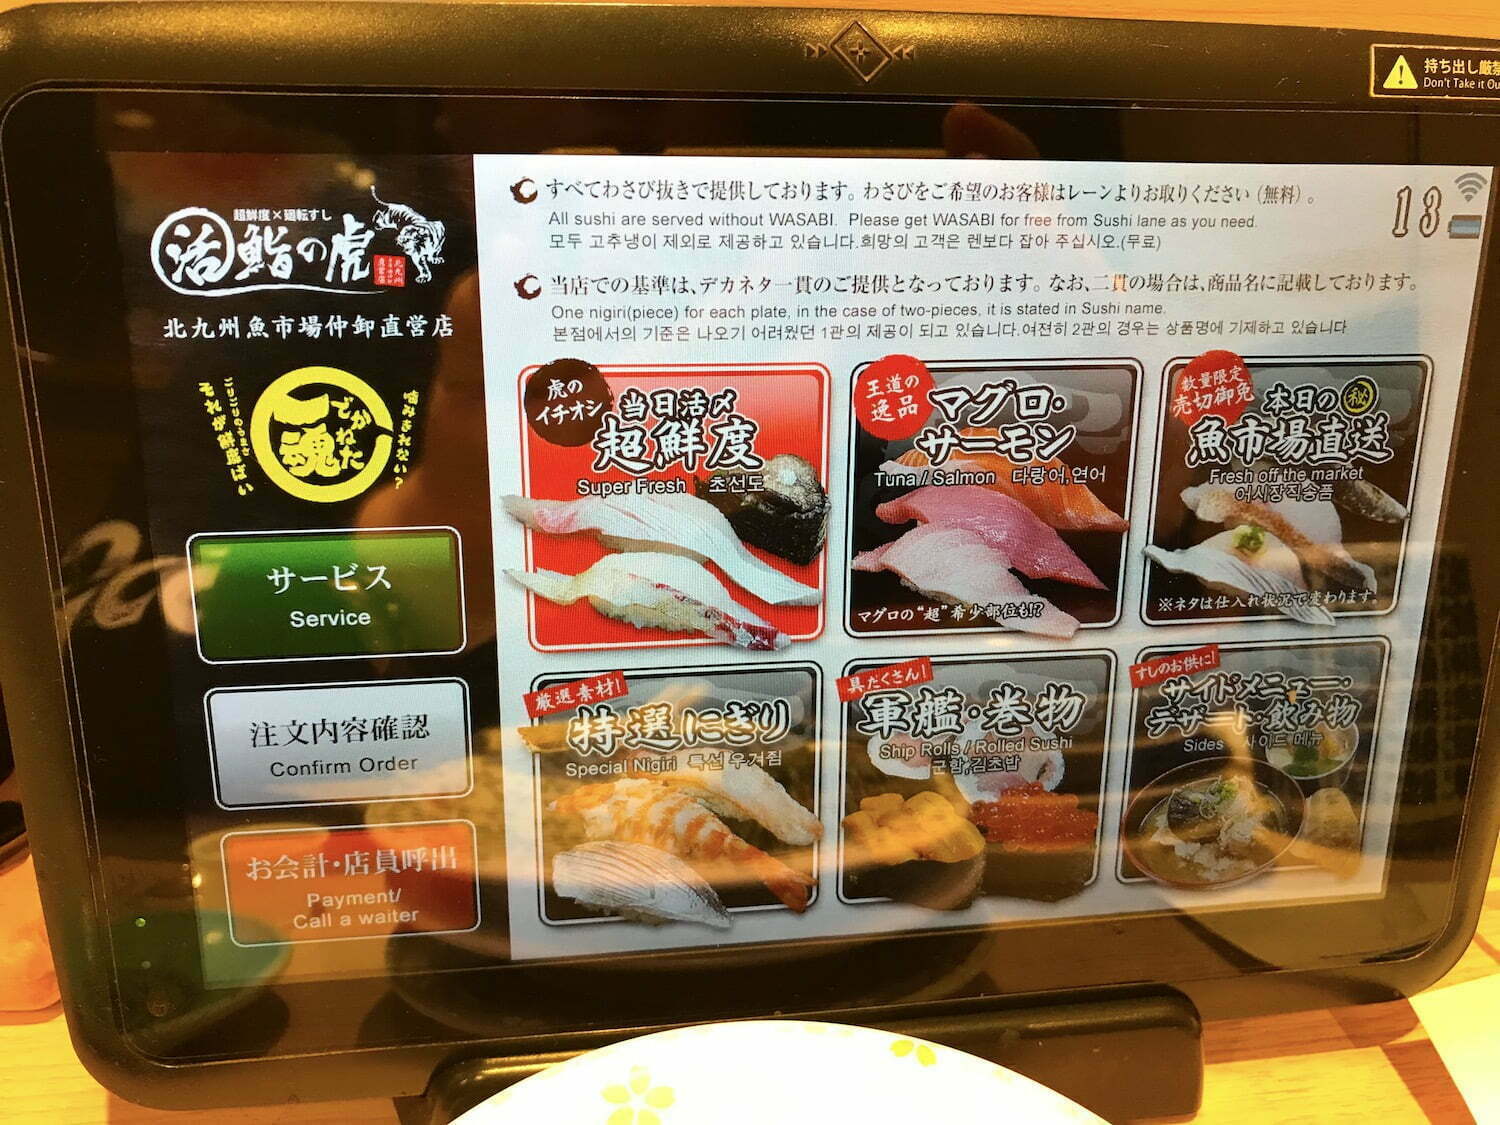 Order with Tablet